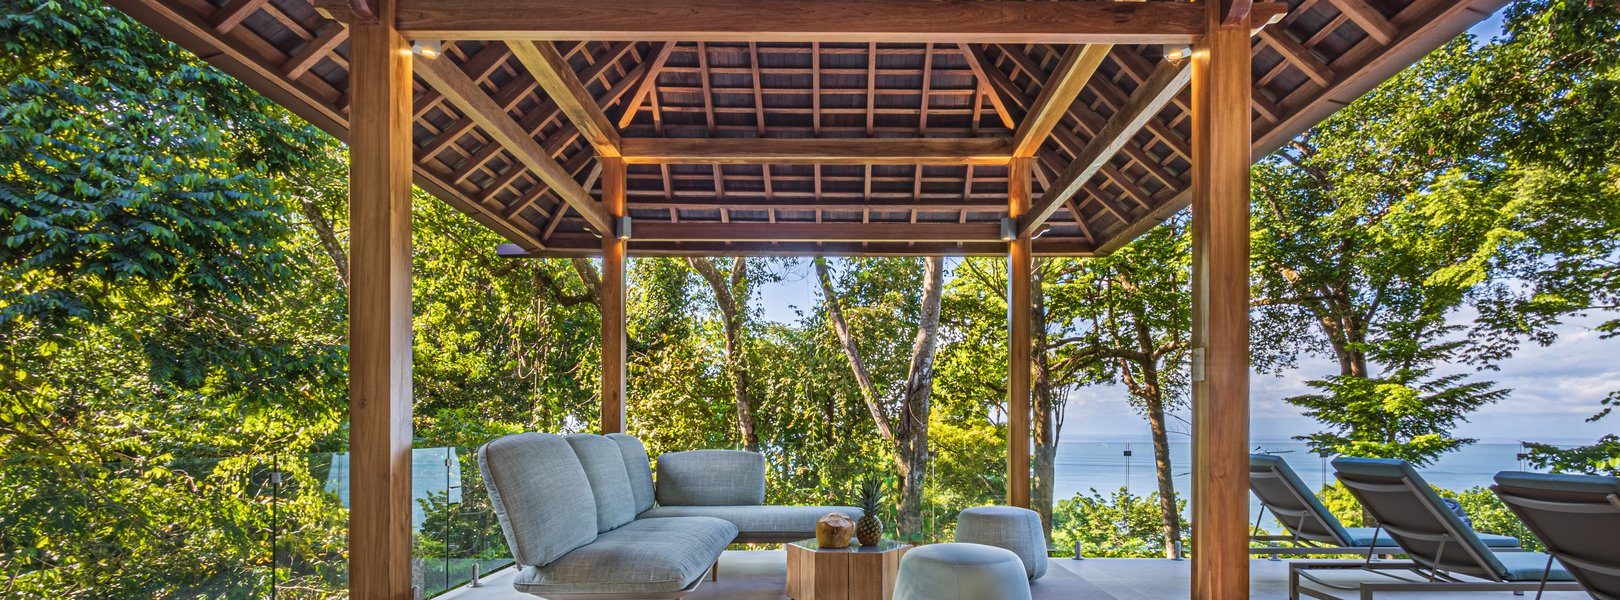 Discover tranquility and enjoy sweeping views of the Pacific in this modern cozy gazebo and sitting area by the pool.